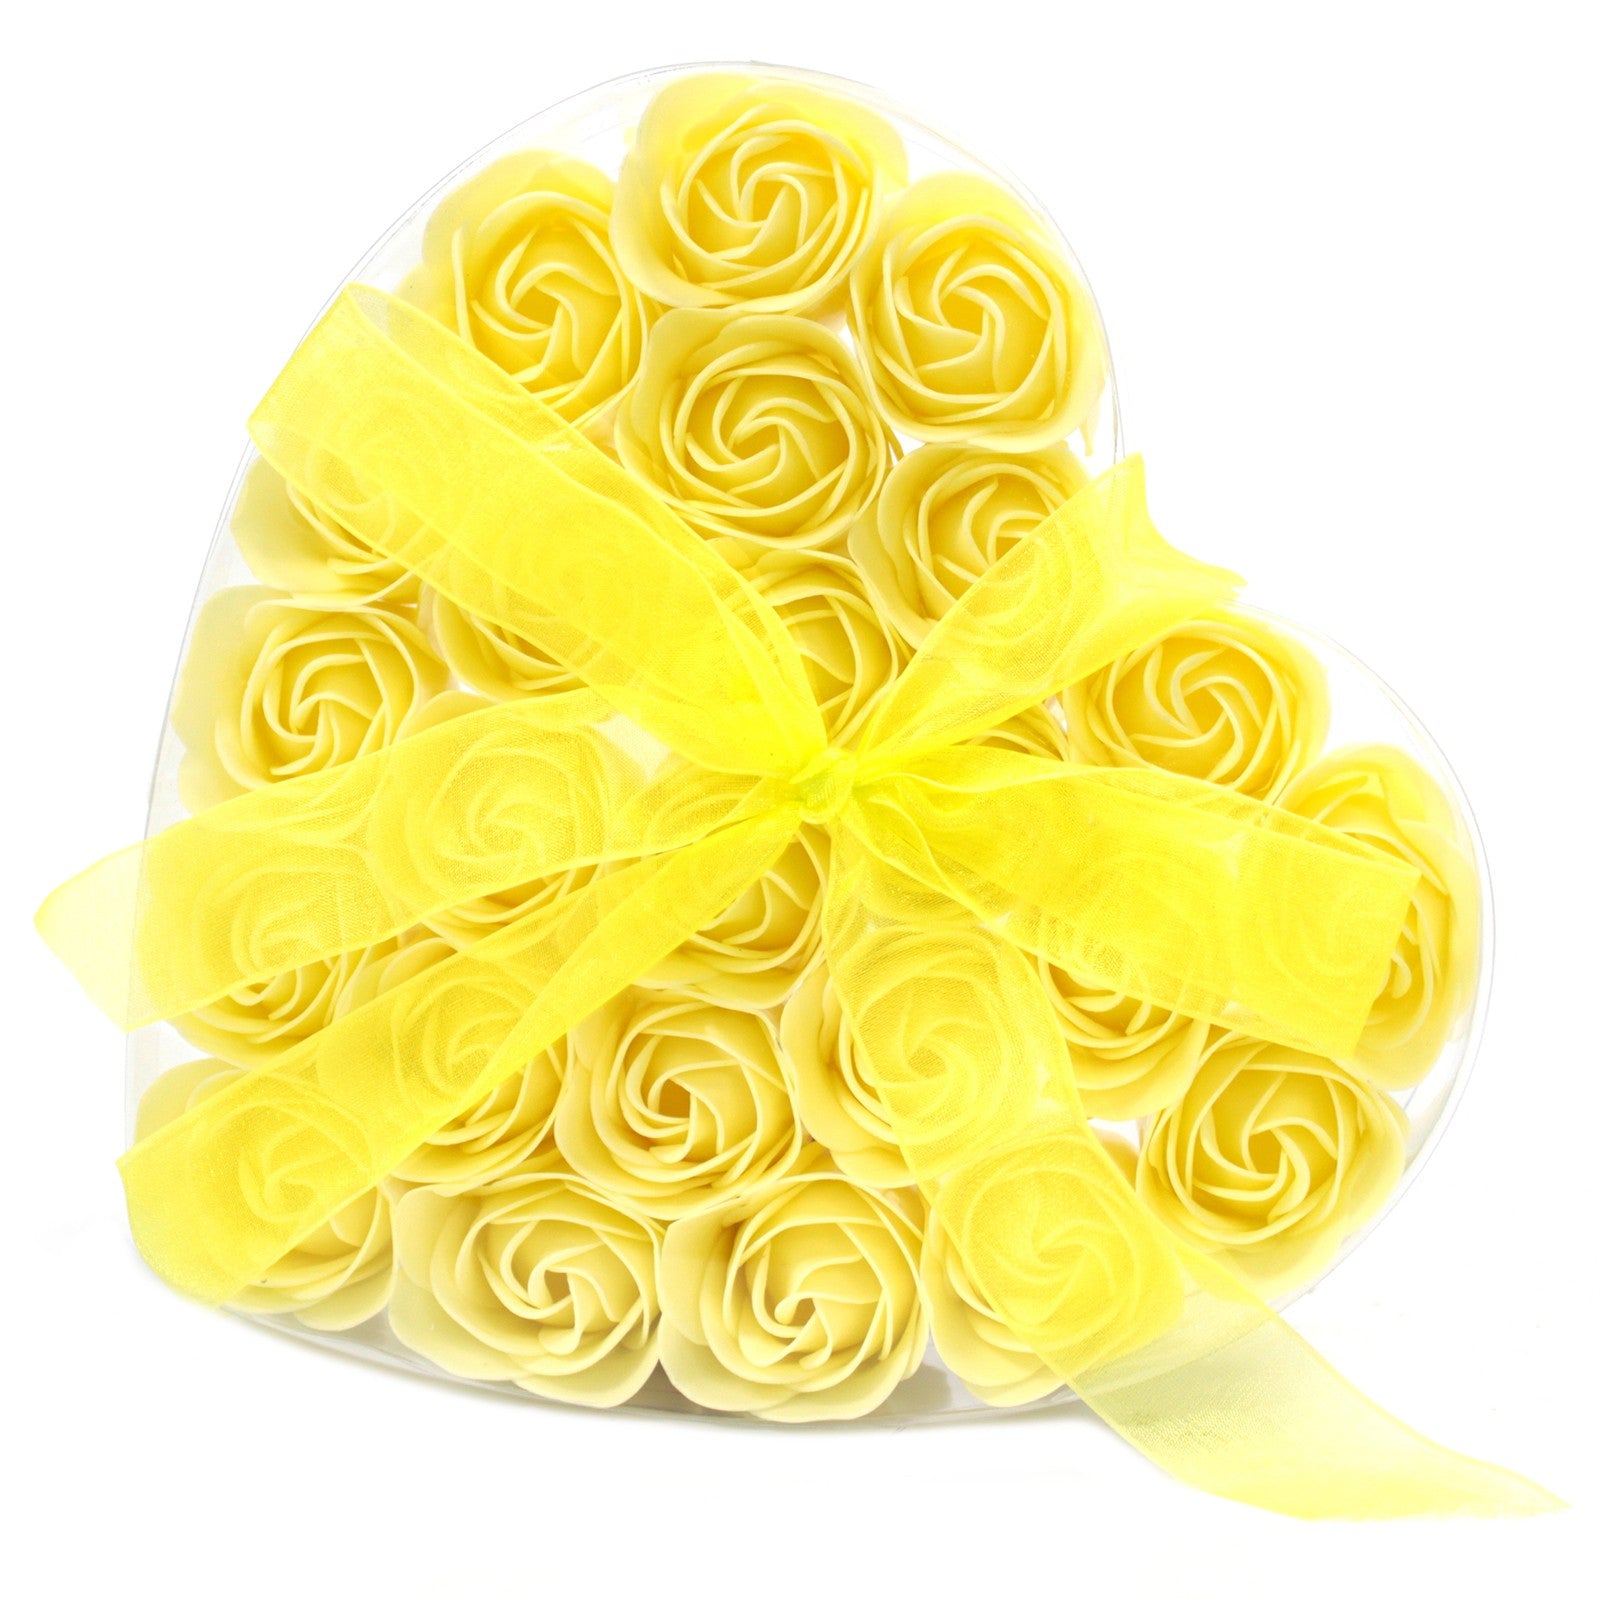 View Set of 24 Soap Flower Heart Box Yellow Roses information